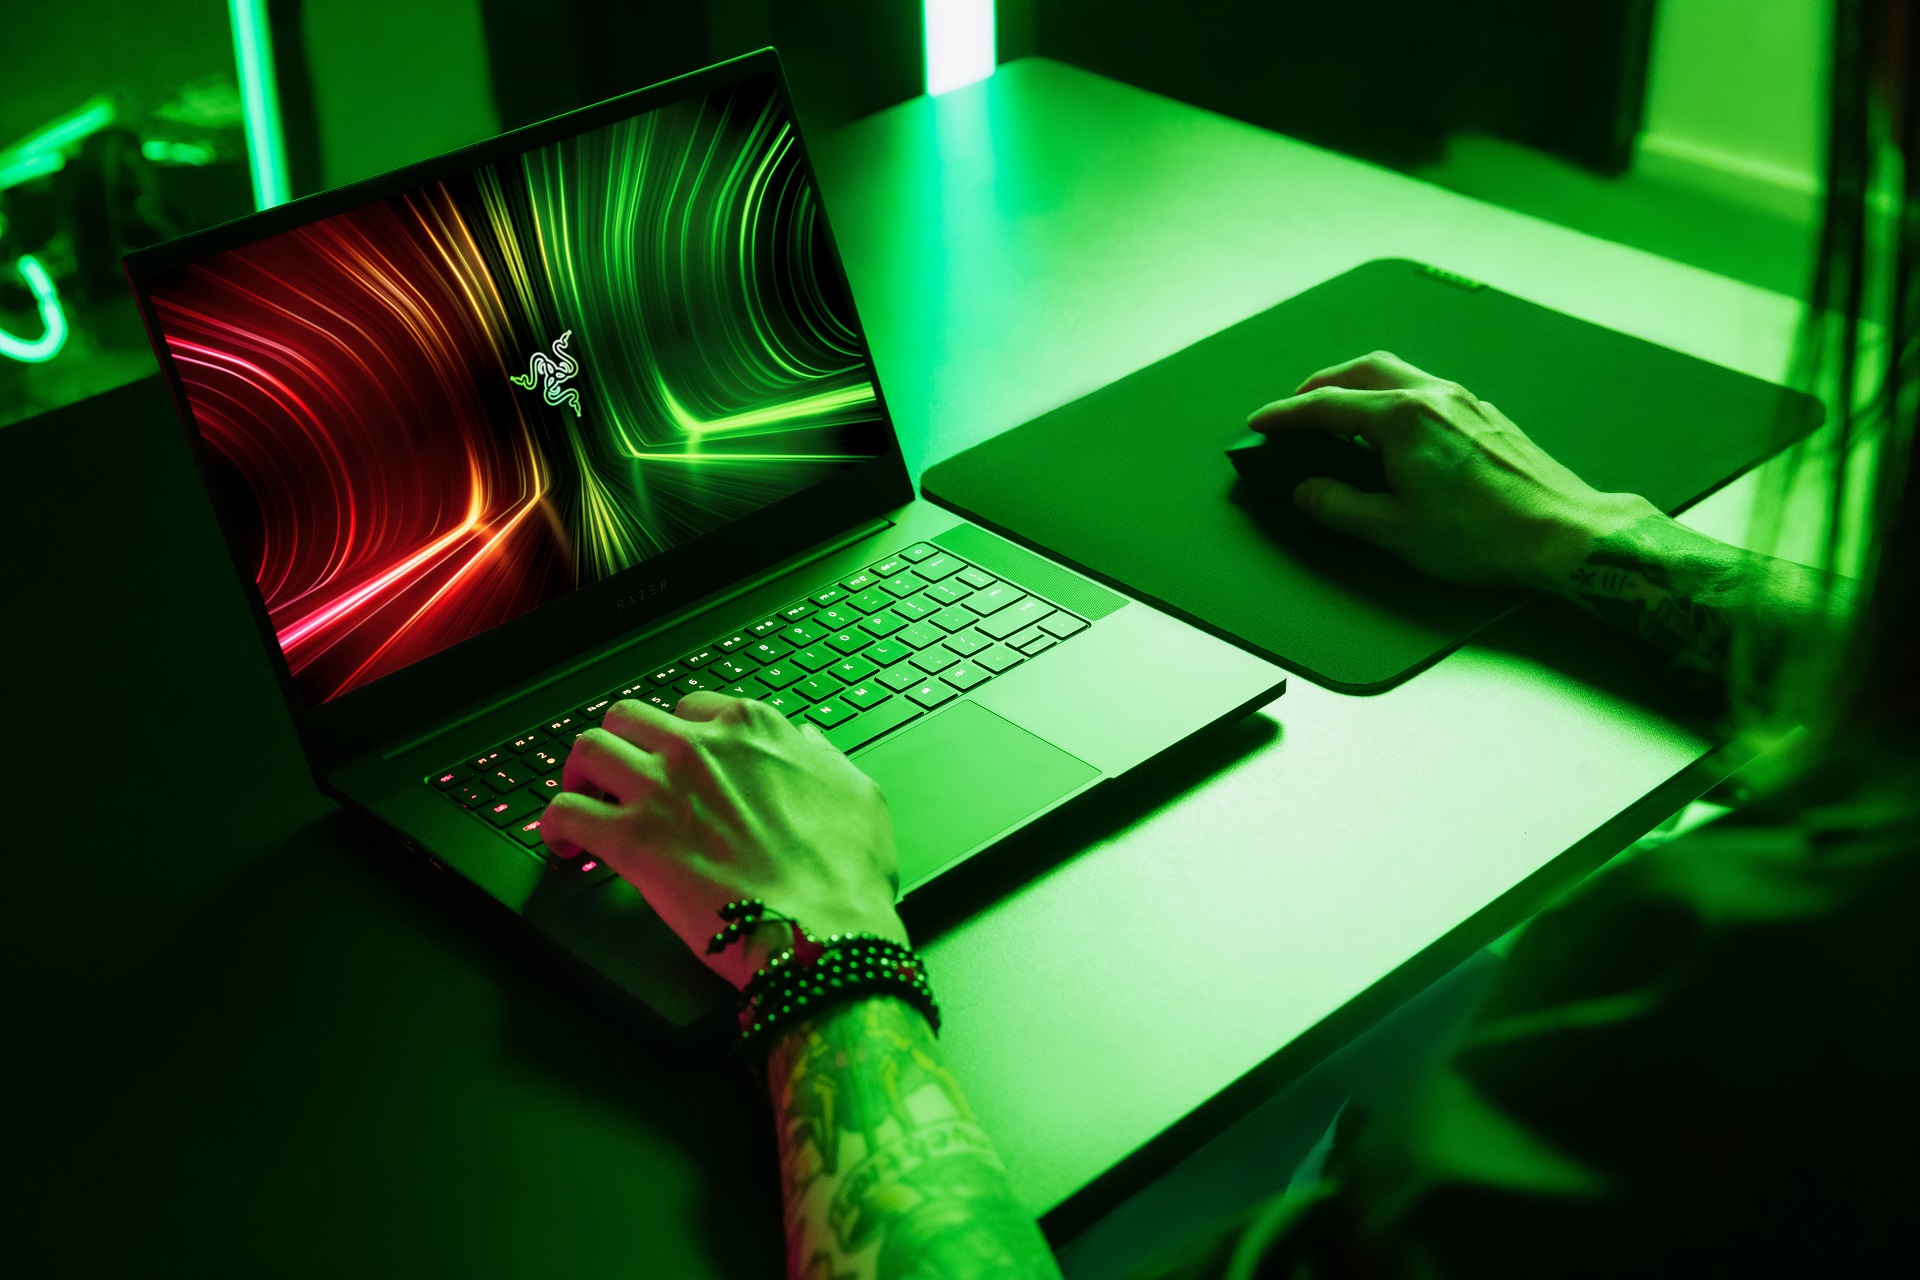 The Razer Blade 14 returns with AMD in tow